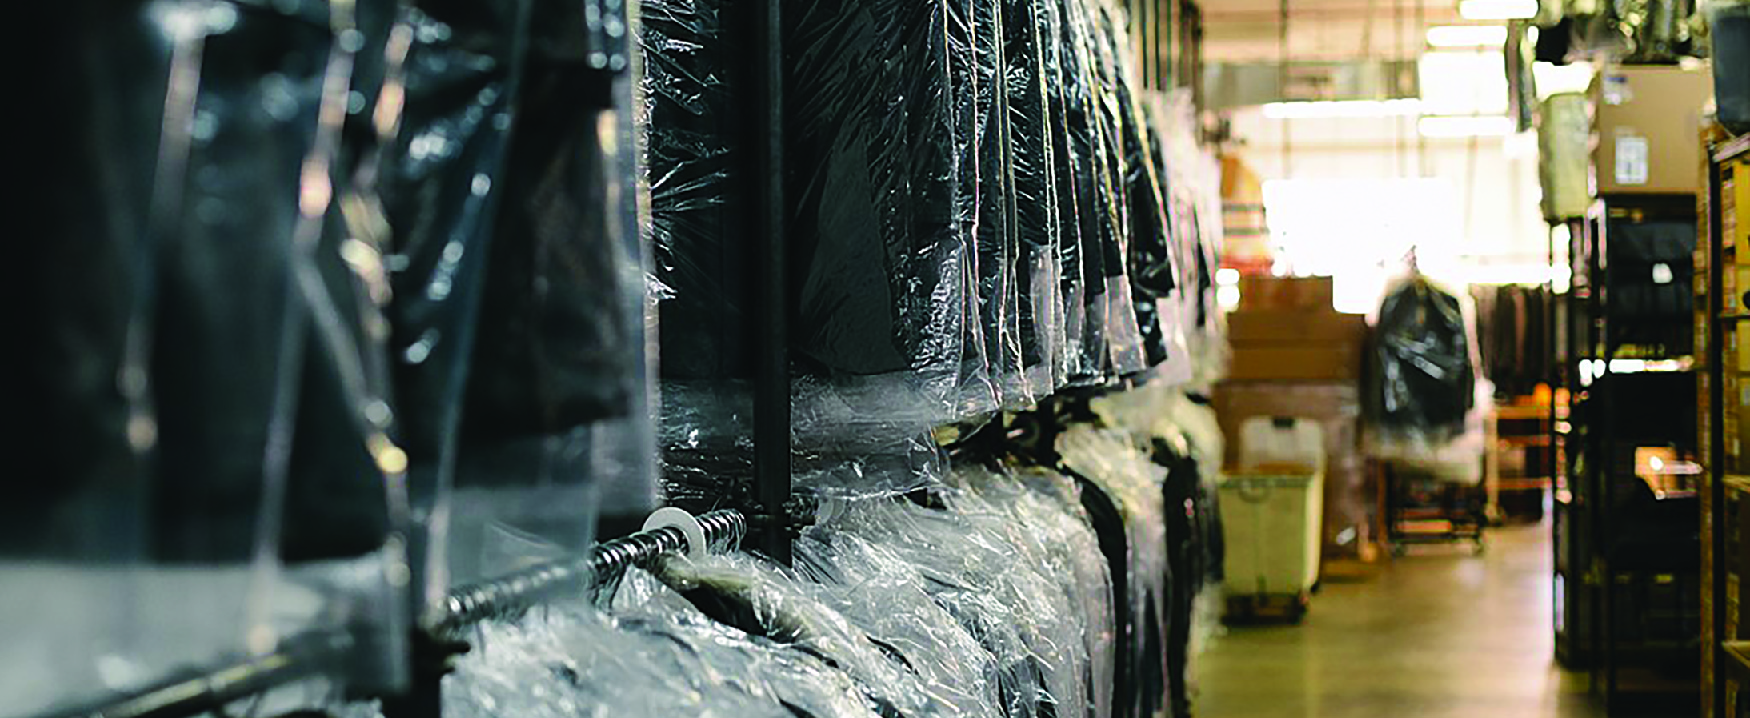 View of interior of dry-cleaning business. On the left are racks of clothes covered in plastic. On the right are shelves holding boxes.